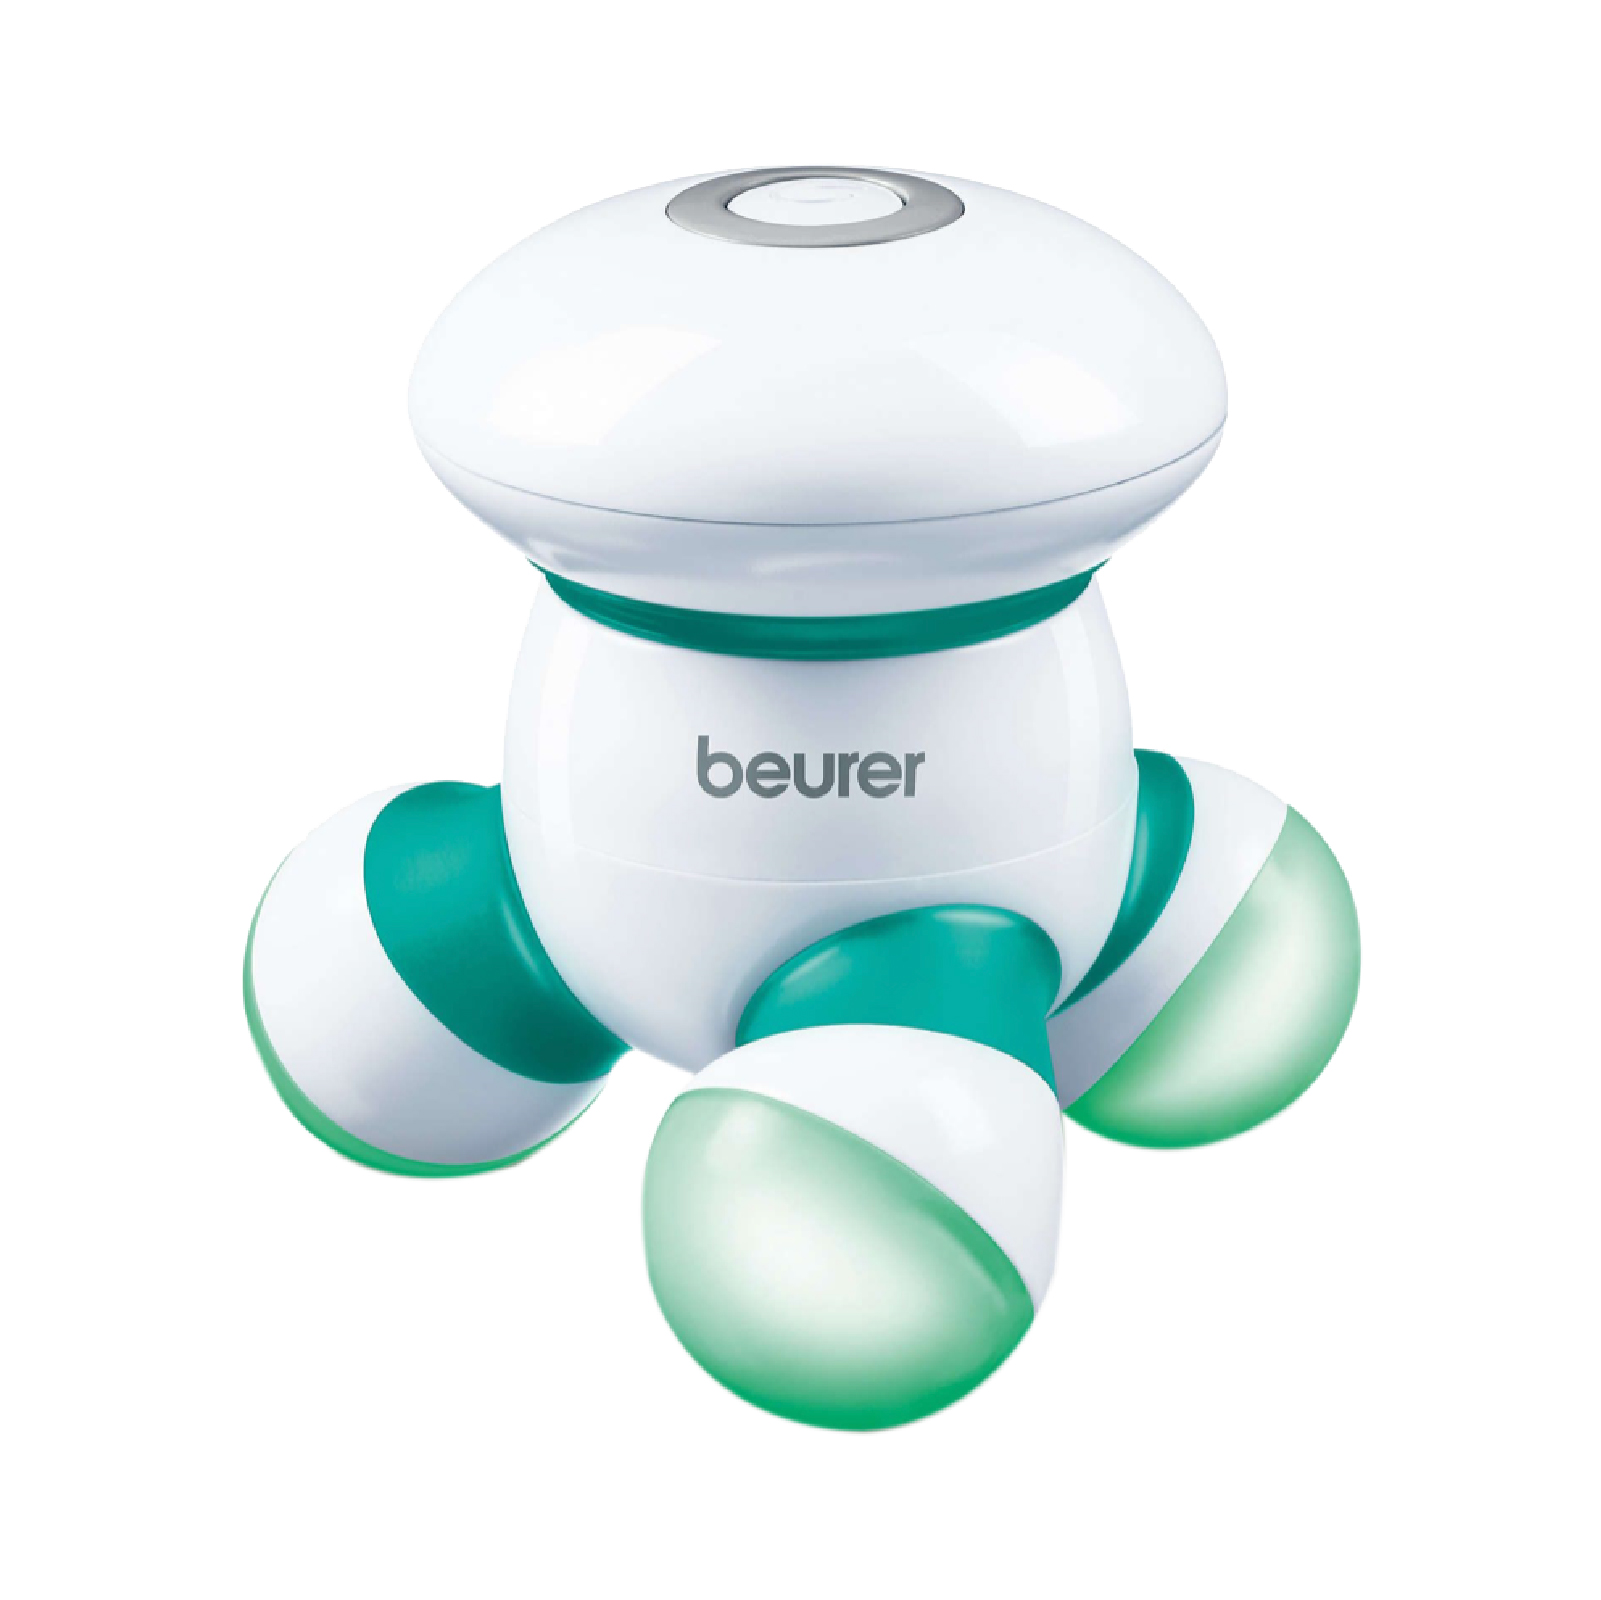 Beurer Mini Massager In Green, Gentle Vibration Massage At Home, In The Office Or On The Go, MG16GREEN